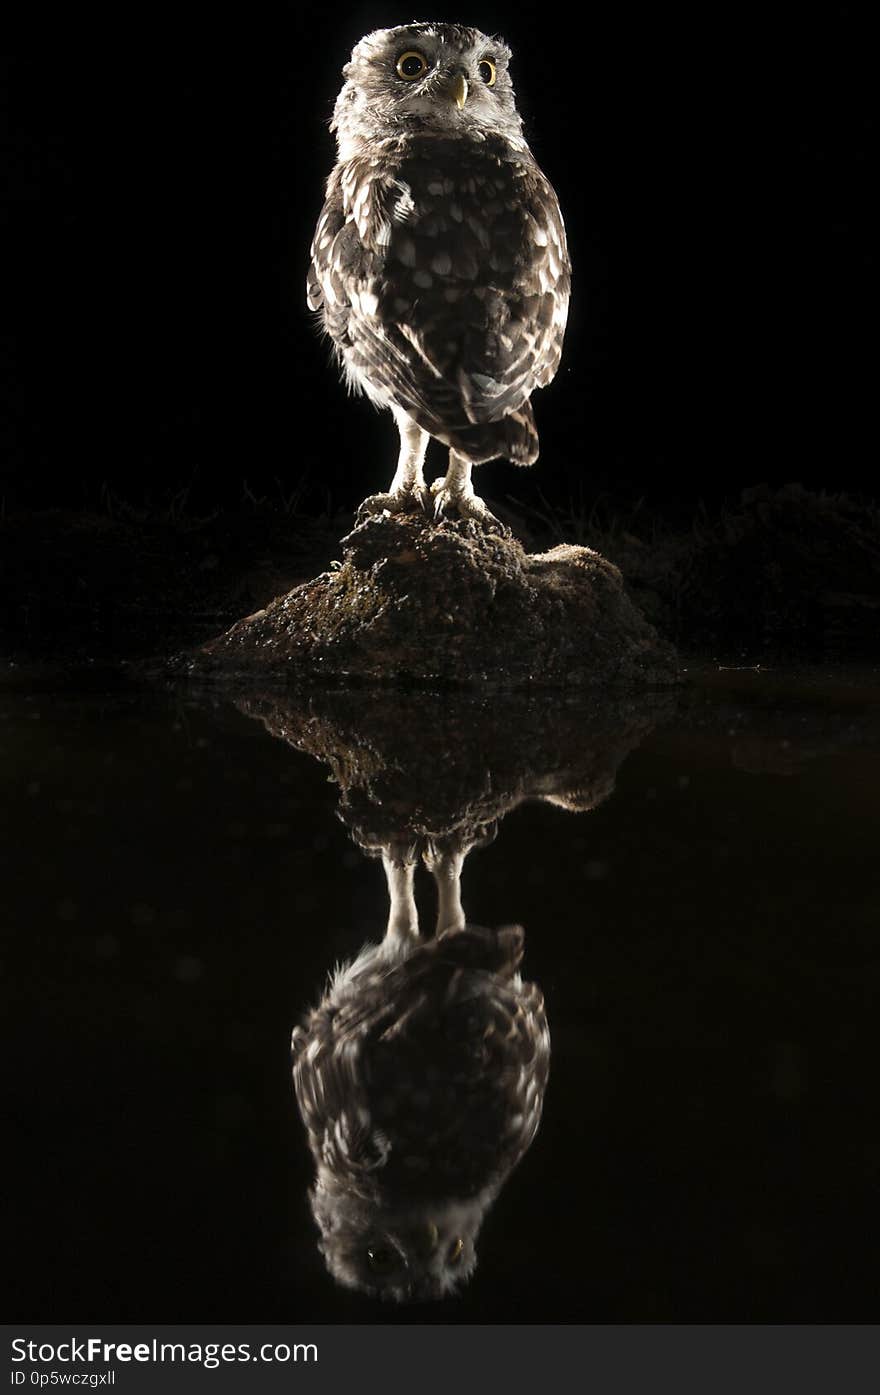 Athene noctua owl, perched on a rock at night, with reflection in the water, Little Owl. Athene noctua owl, perched on a rock at night, with reflection in the water, Little Owl